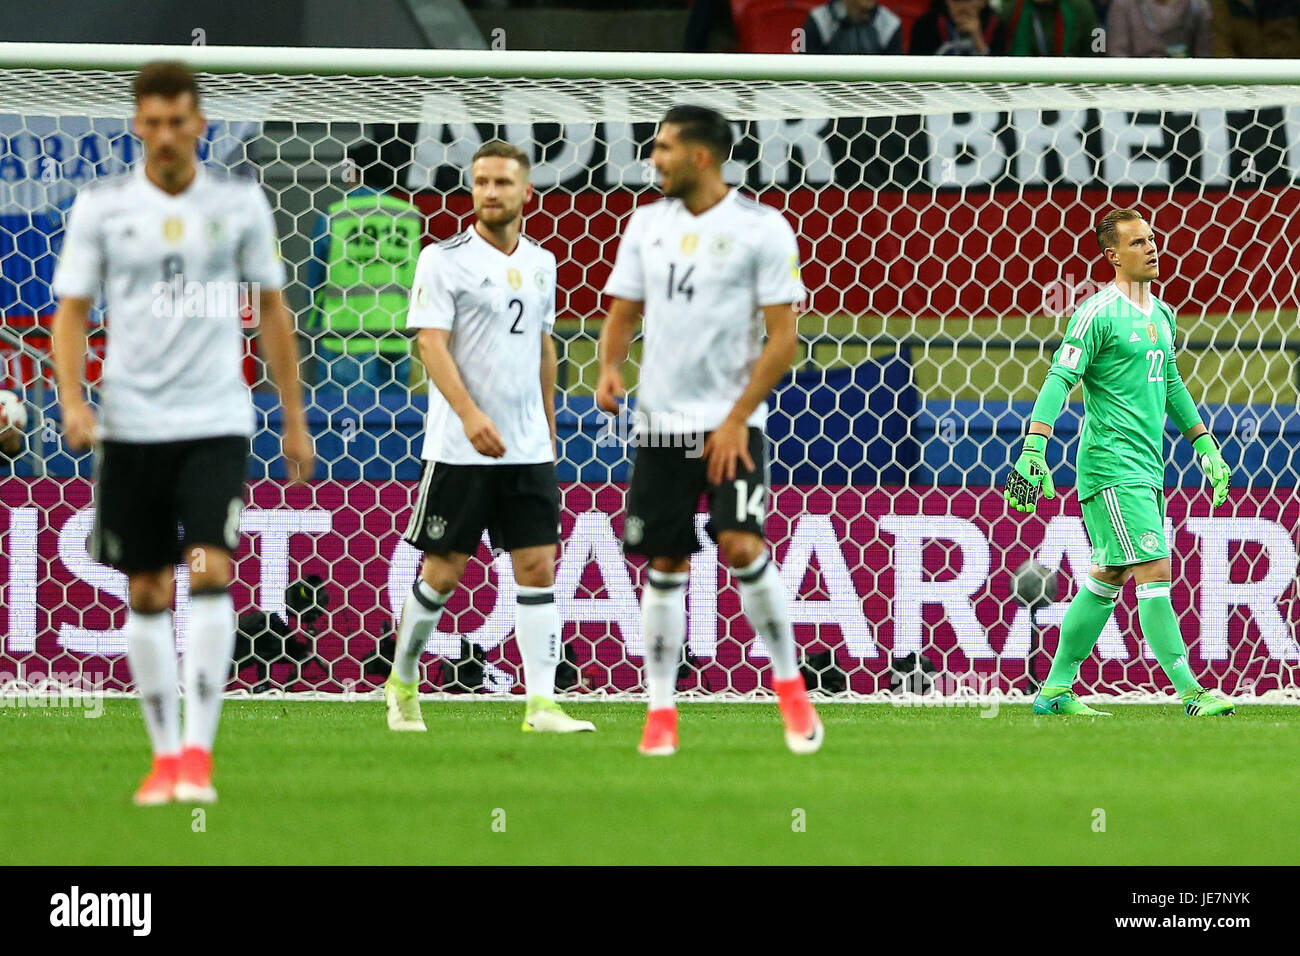 Kazan, Russia. 22nd Jun, 2017. Marc-Andre Ter Stegen of Germany regrets a goal conceded during Germany-Chile match valid for the second round of the 2017 Confederations Cup on Thursday (22) held at the Kazan Arena in Kazan, Russia. Credit: Foto Arena LTDA/Alamy Live News Stock Photo